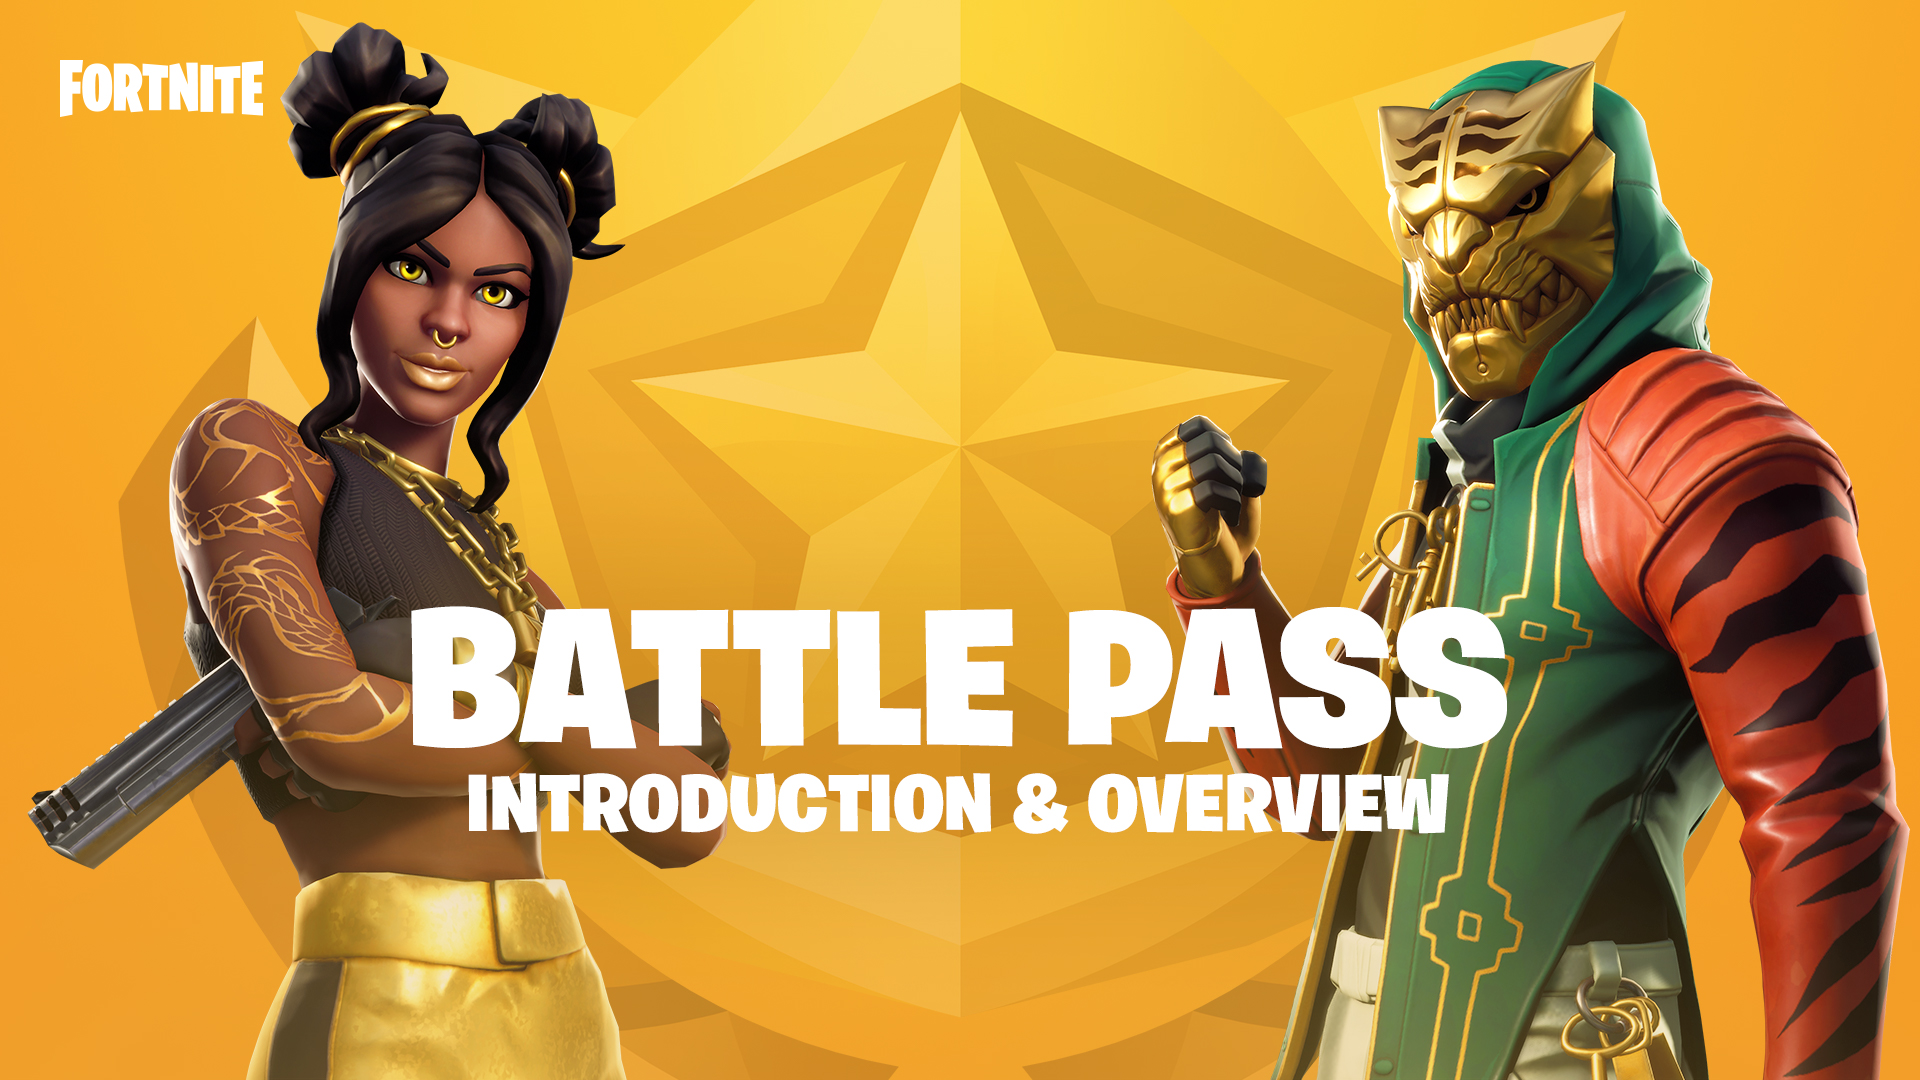 play fortnite battle pass introduction overview with two characters on an orange star background - xbox 1 fortnite free skin